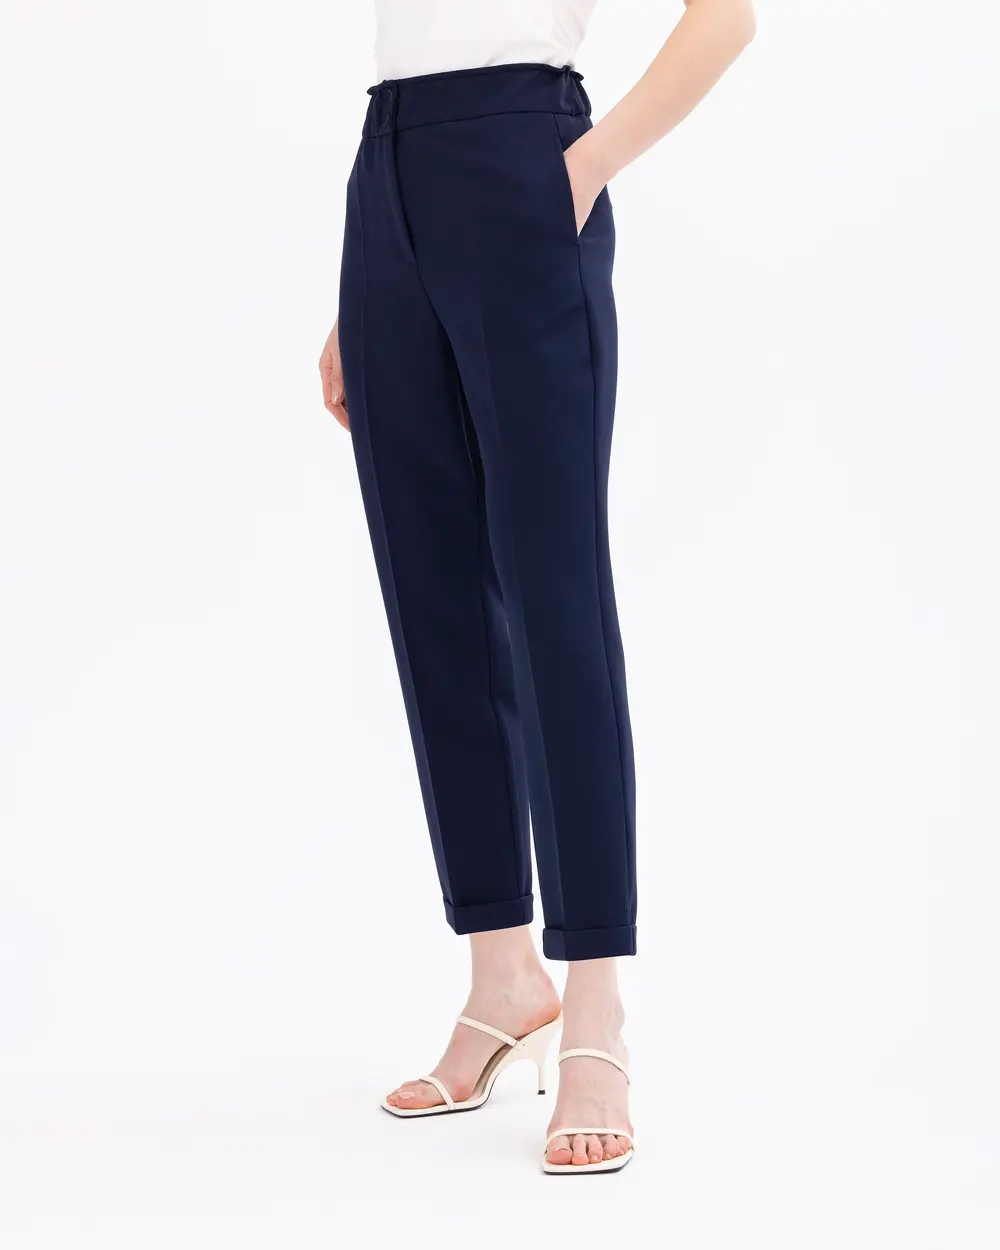 Ankle Length Pants with Drawstring Waist